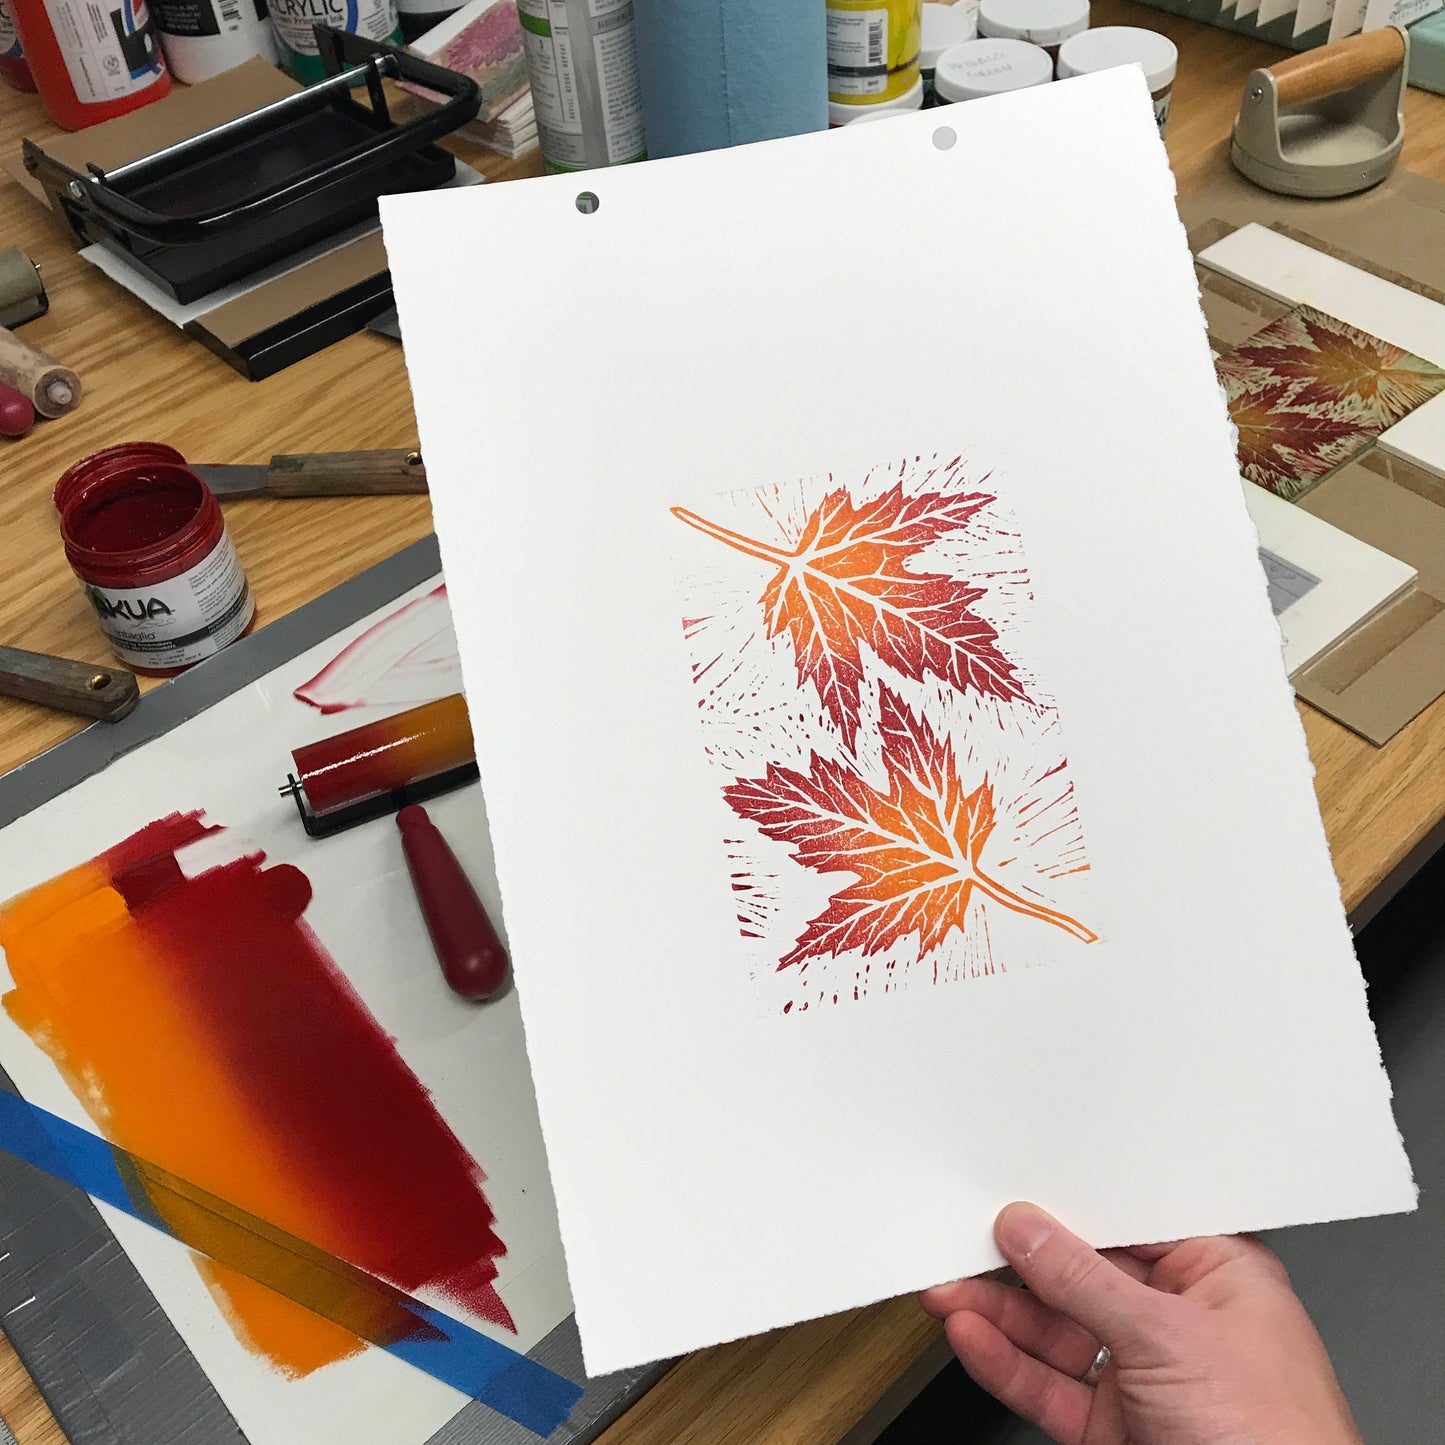 Silver Maple leaves - woodblock print (9x12”)